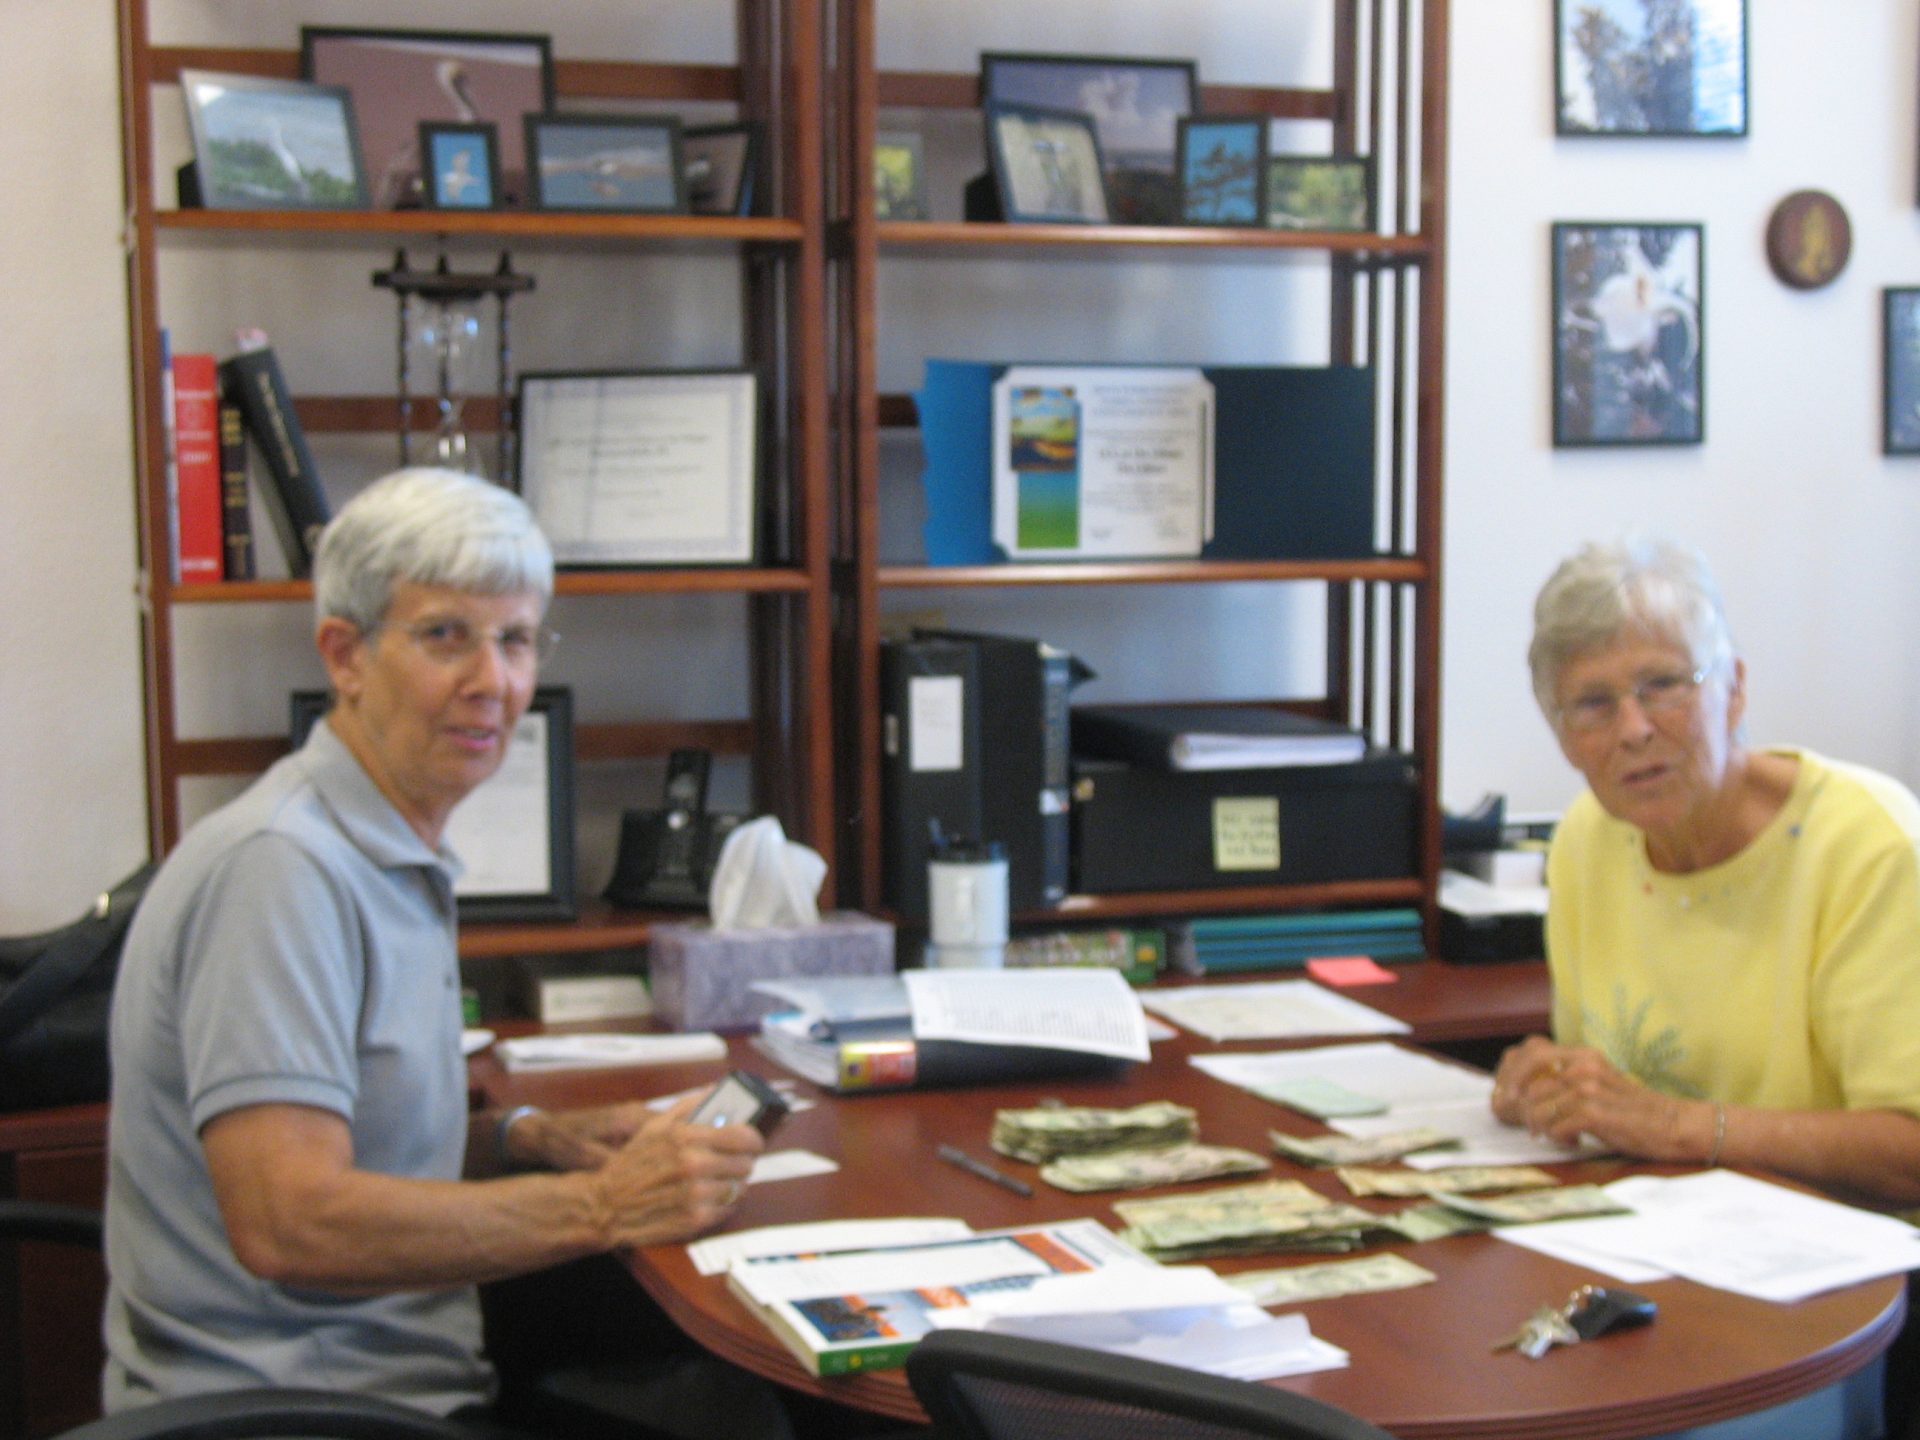 Pat and Nancy working in the church office